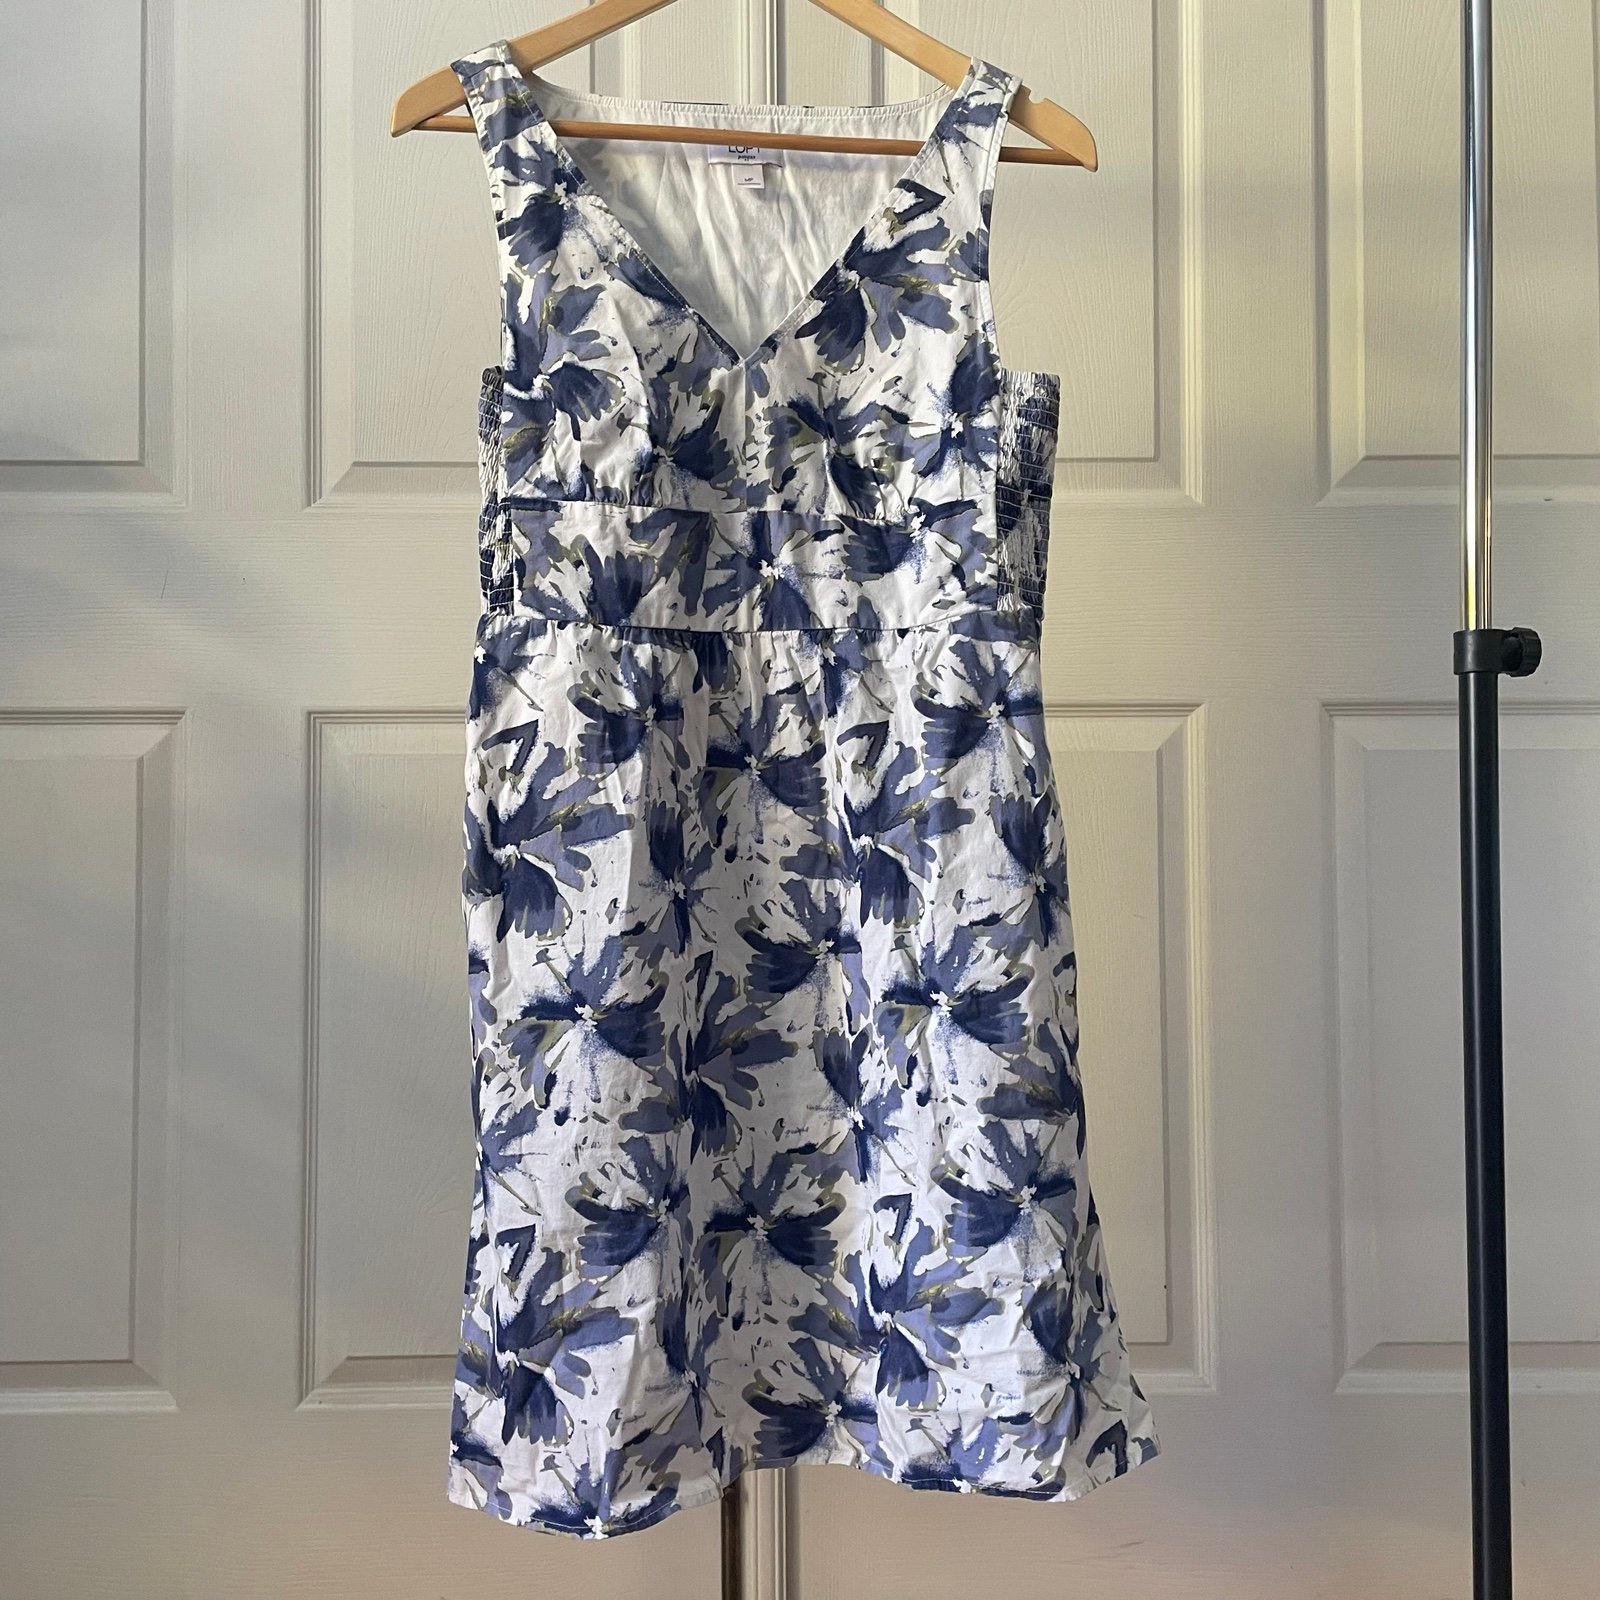 cheapest place to buy  Ann Taylor sundress MR99Rd3cy Ou